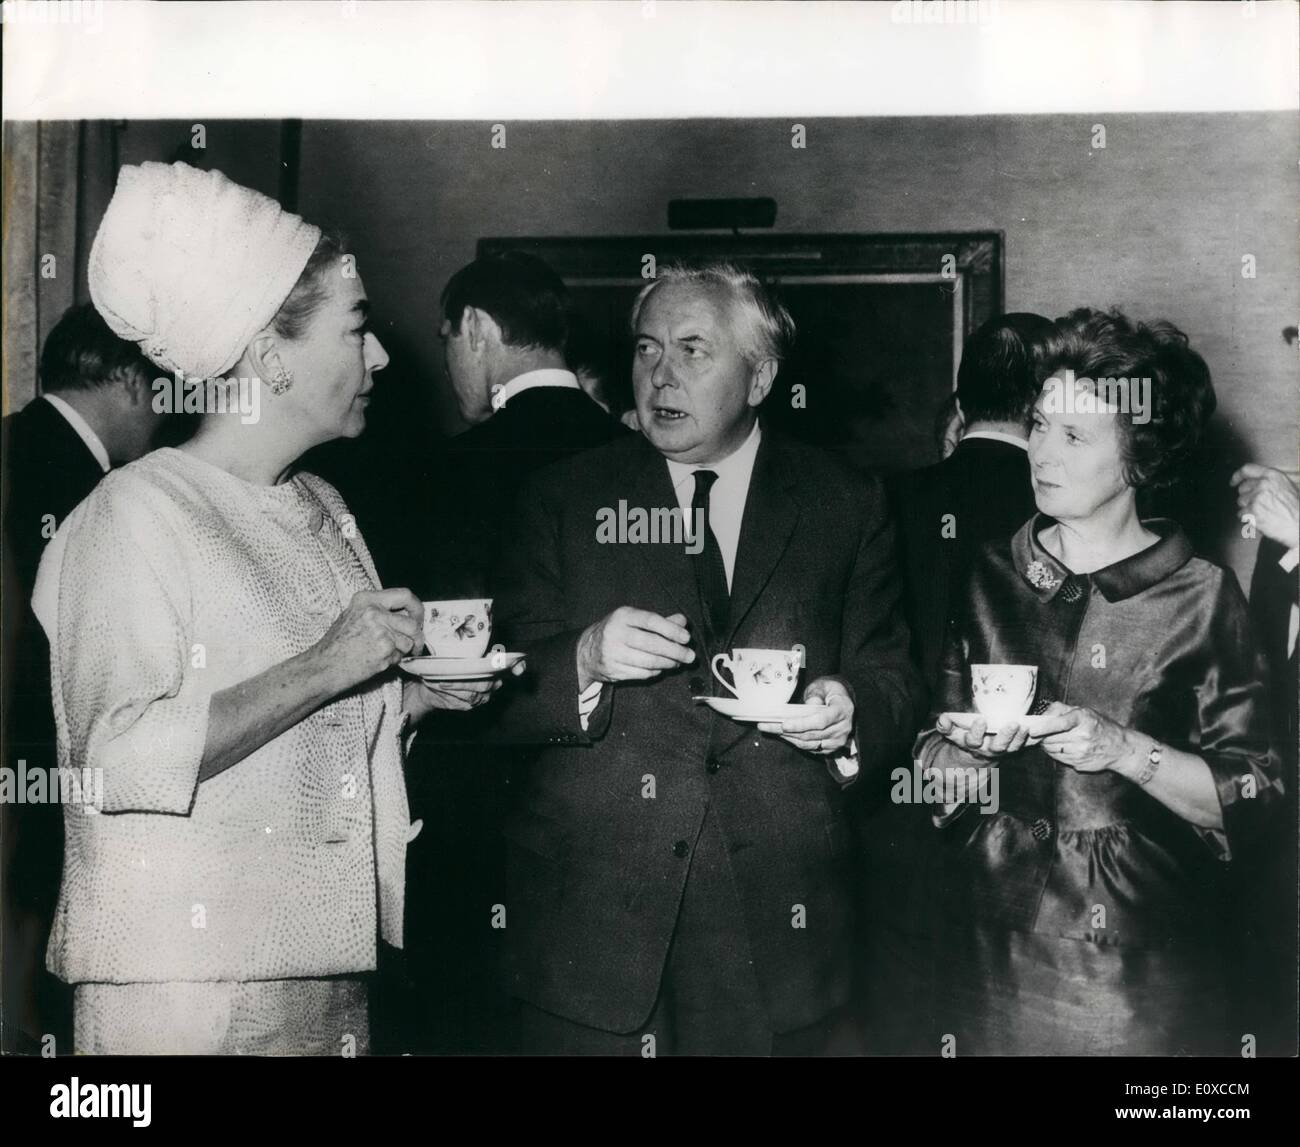 Apr. 04, 1966 - Premier meets Joan Crawford; Actress Joan Crawford and other leaders of Variety Club International - were yesterday invited to No. 10 Downing Street for afternoon tea, by the Prime Minister, Mr. Harold Wilson. Photo Shows The Prime Minister, Mr. Harold Wilson and Mrs. Wilson, chatting to Joan Crawford (left), over a cup of tea - at No. 10, Downing street yesterday. Stock Photo